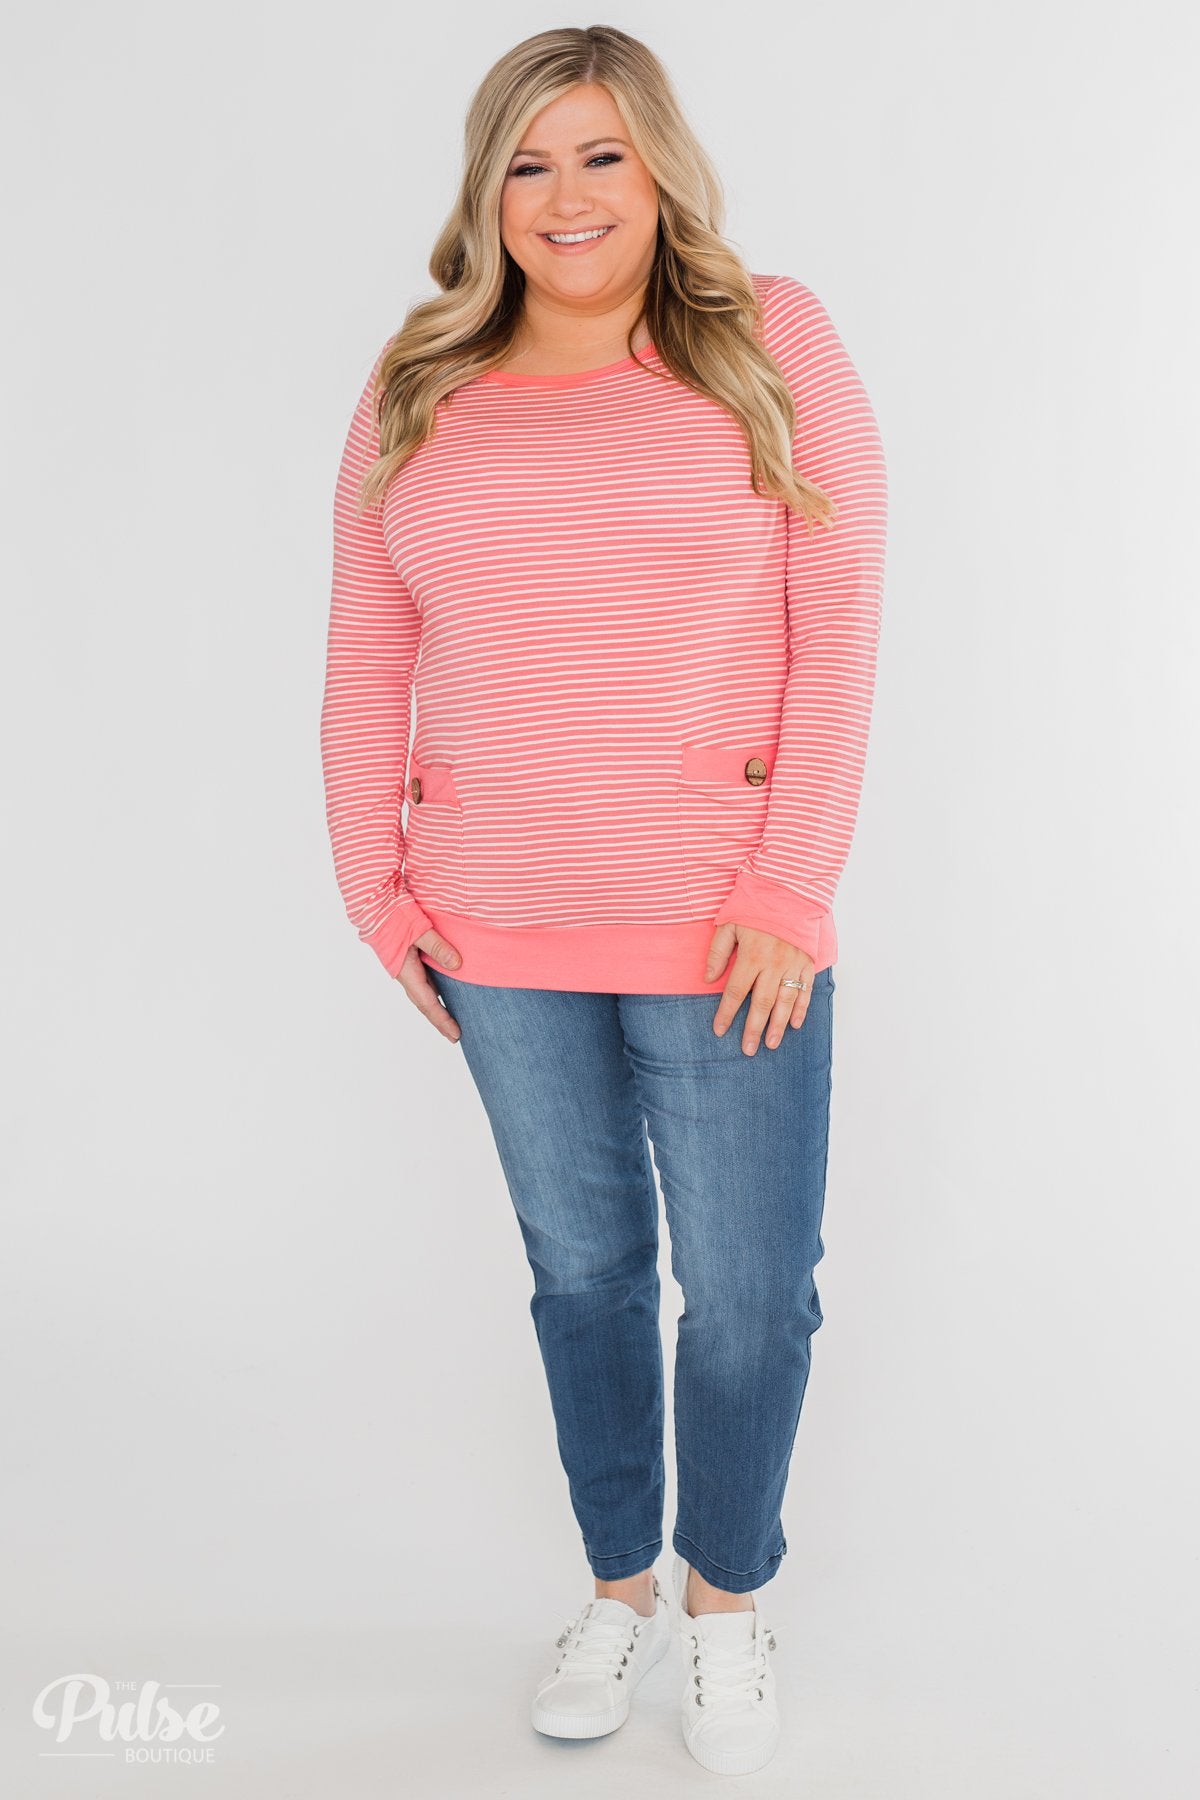 So Much In Common Striped Pocket Top- Pink